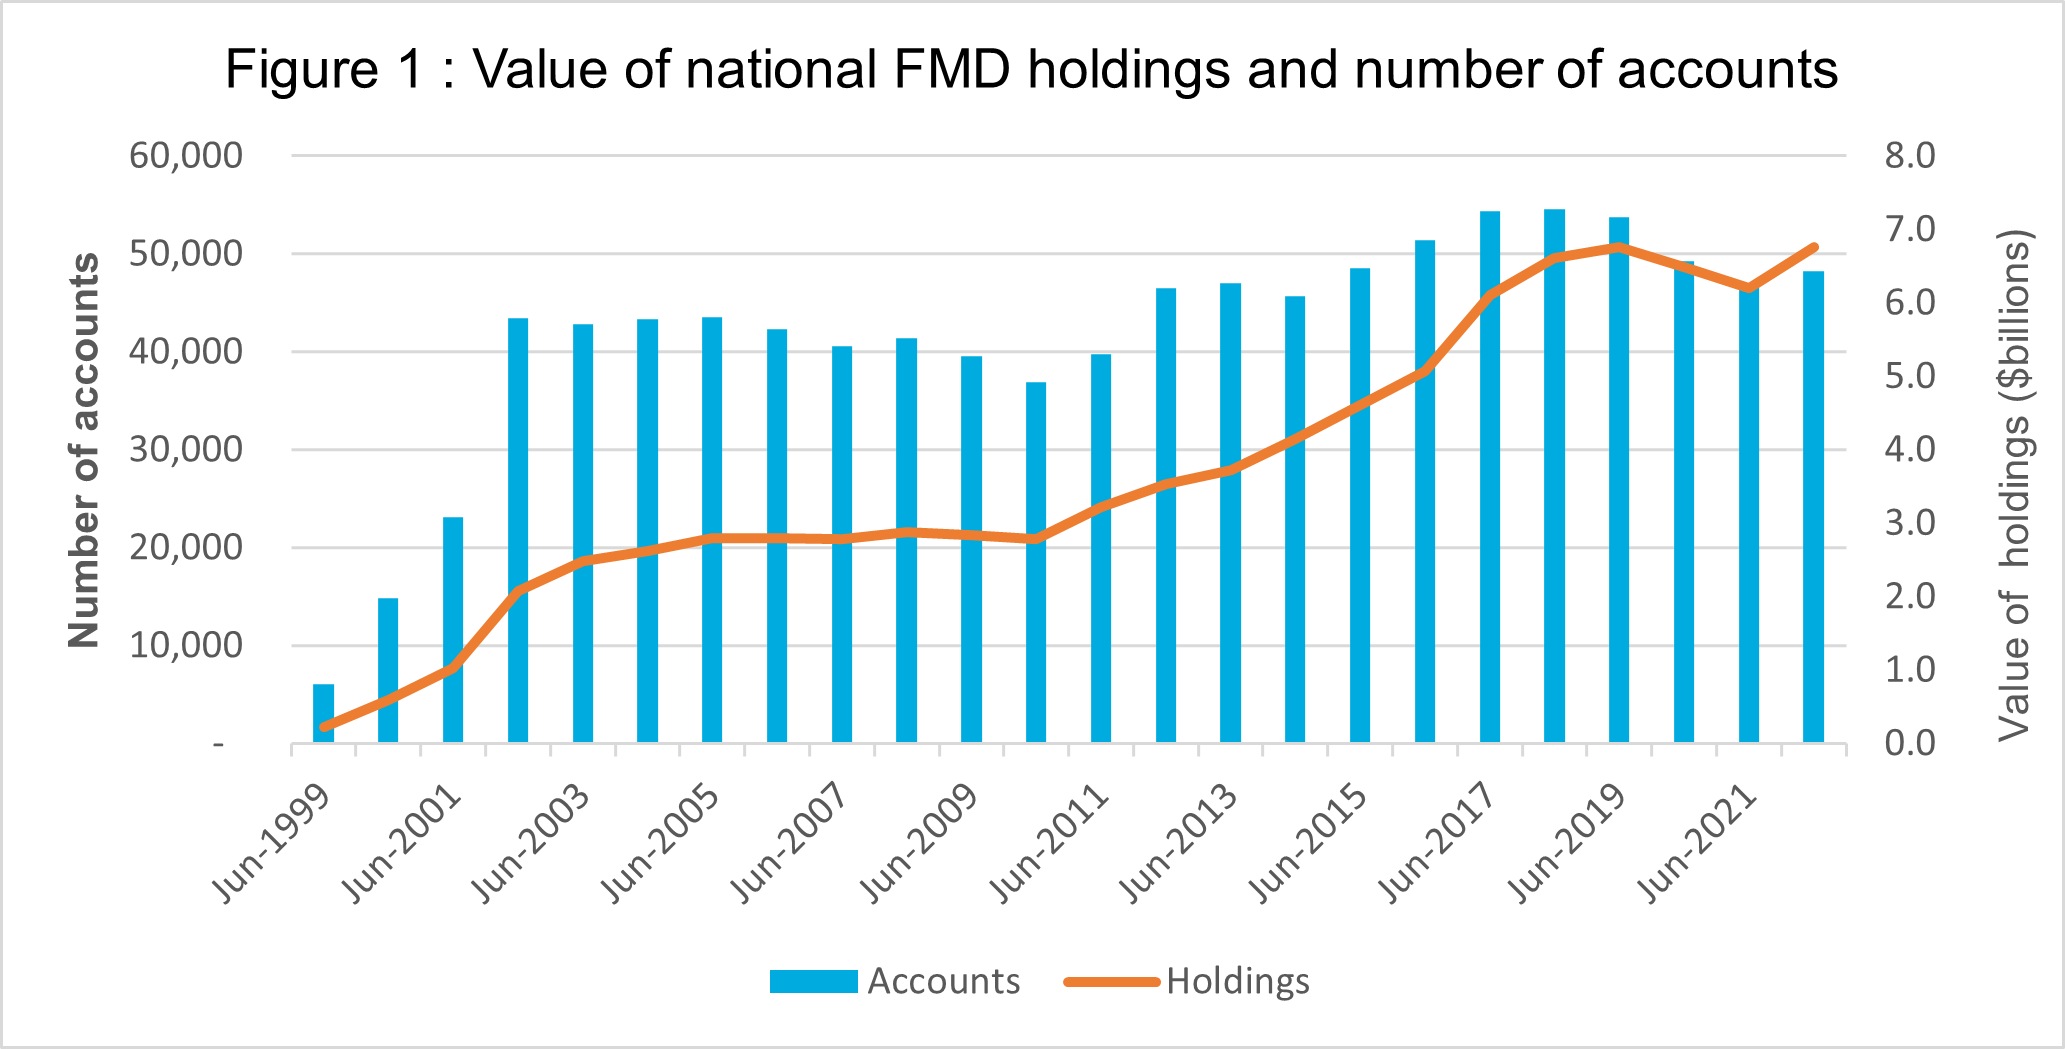 A graph showing the amount of FMD accounts open compared to the value of holdings. Holdings and accounts decreased from 2019 to 2021 but holdings have started to increase again in recent years.